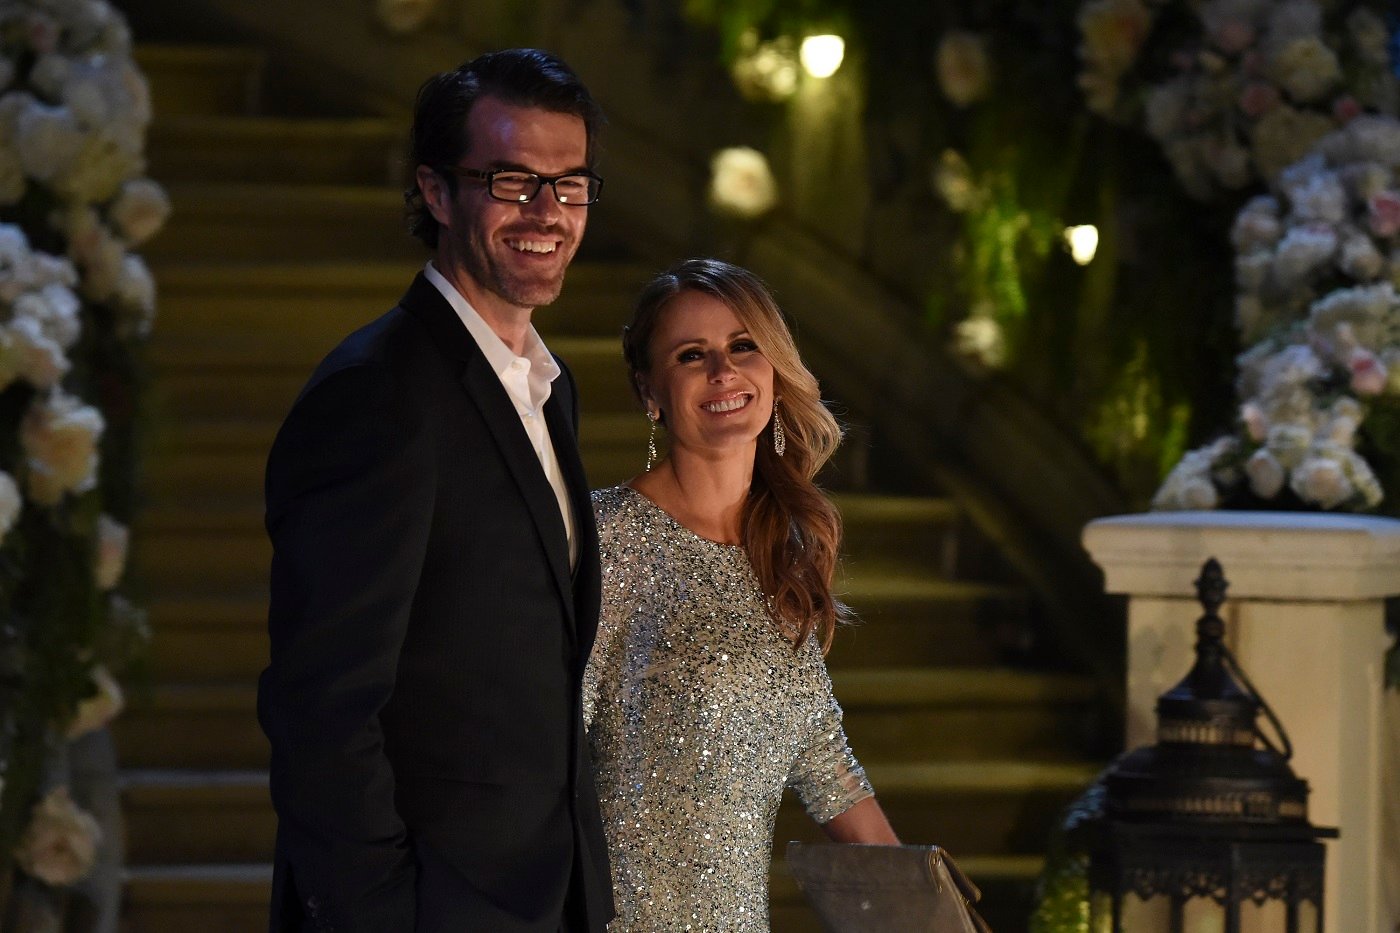 Ryan Sutter and Trista Sutter of 'The Bachelorette' walk side by side and smile at the camera